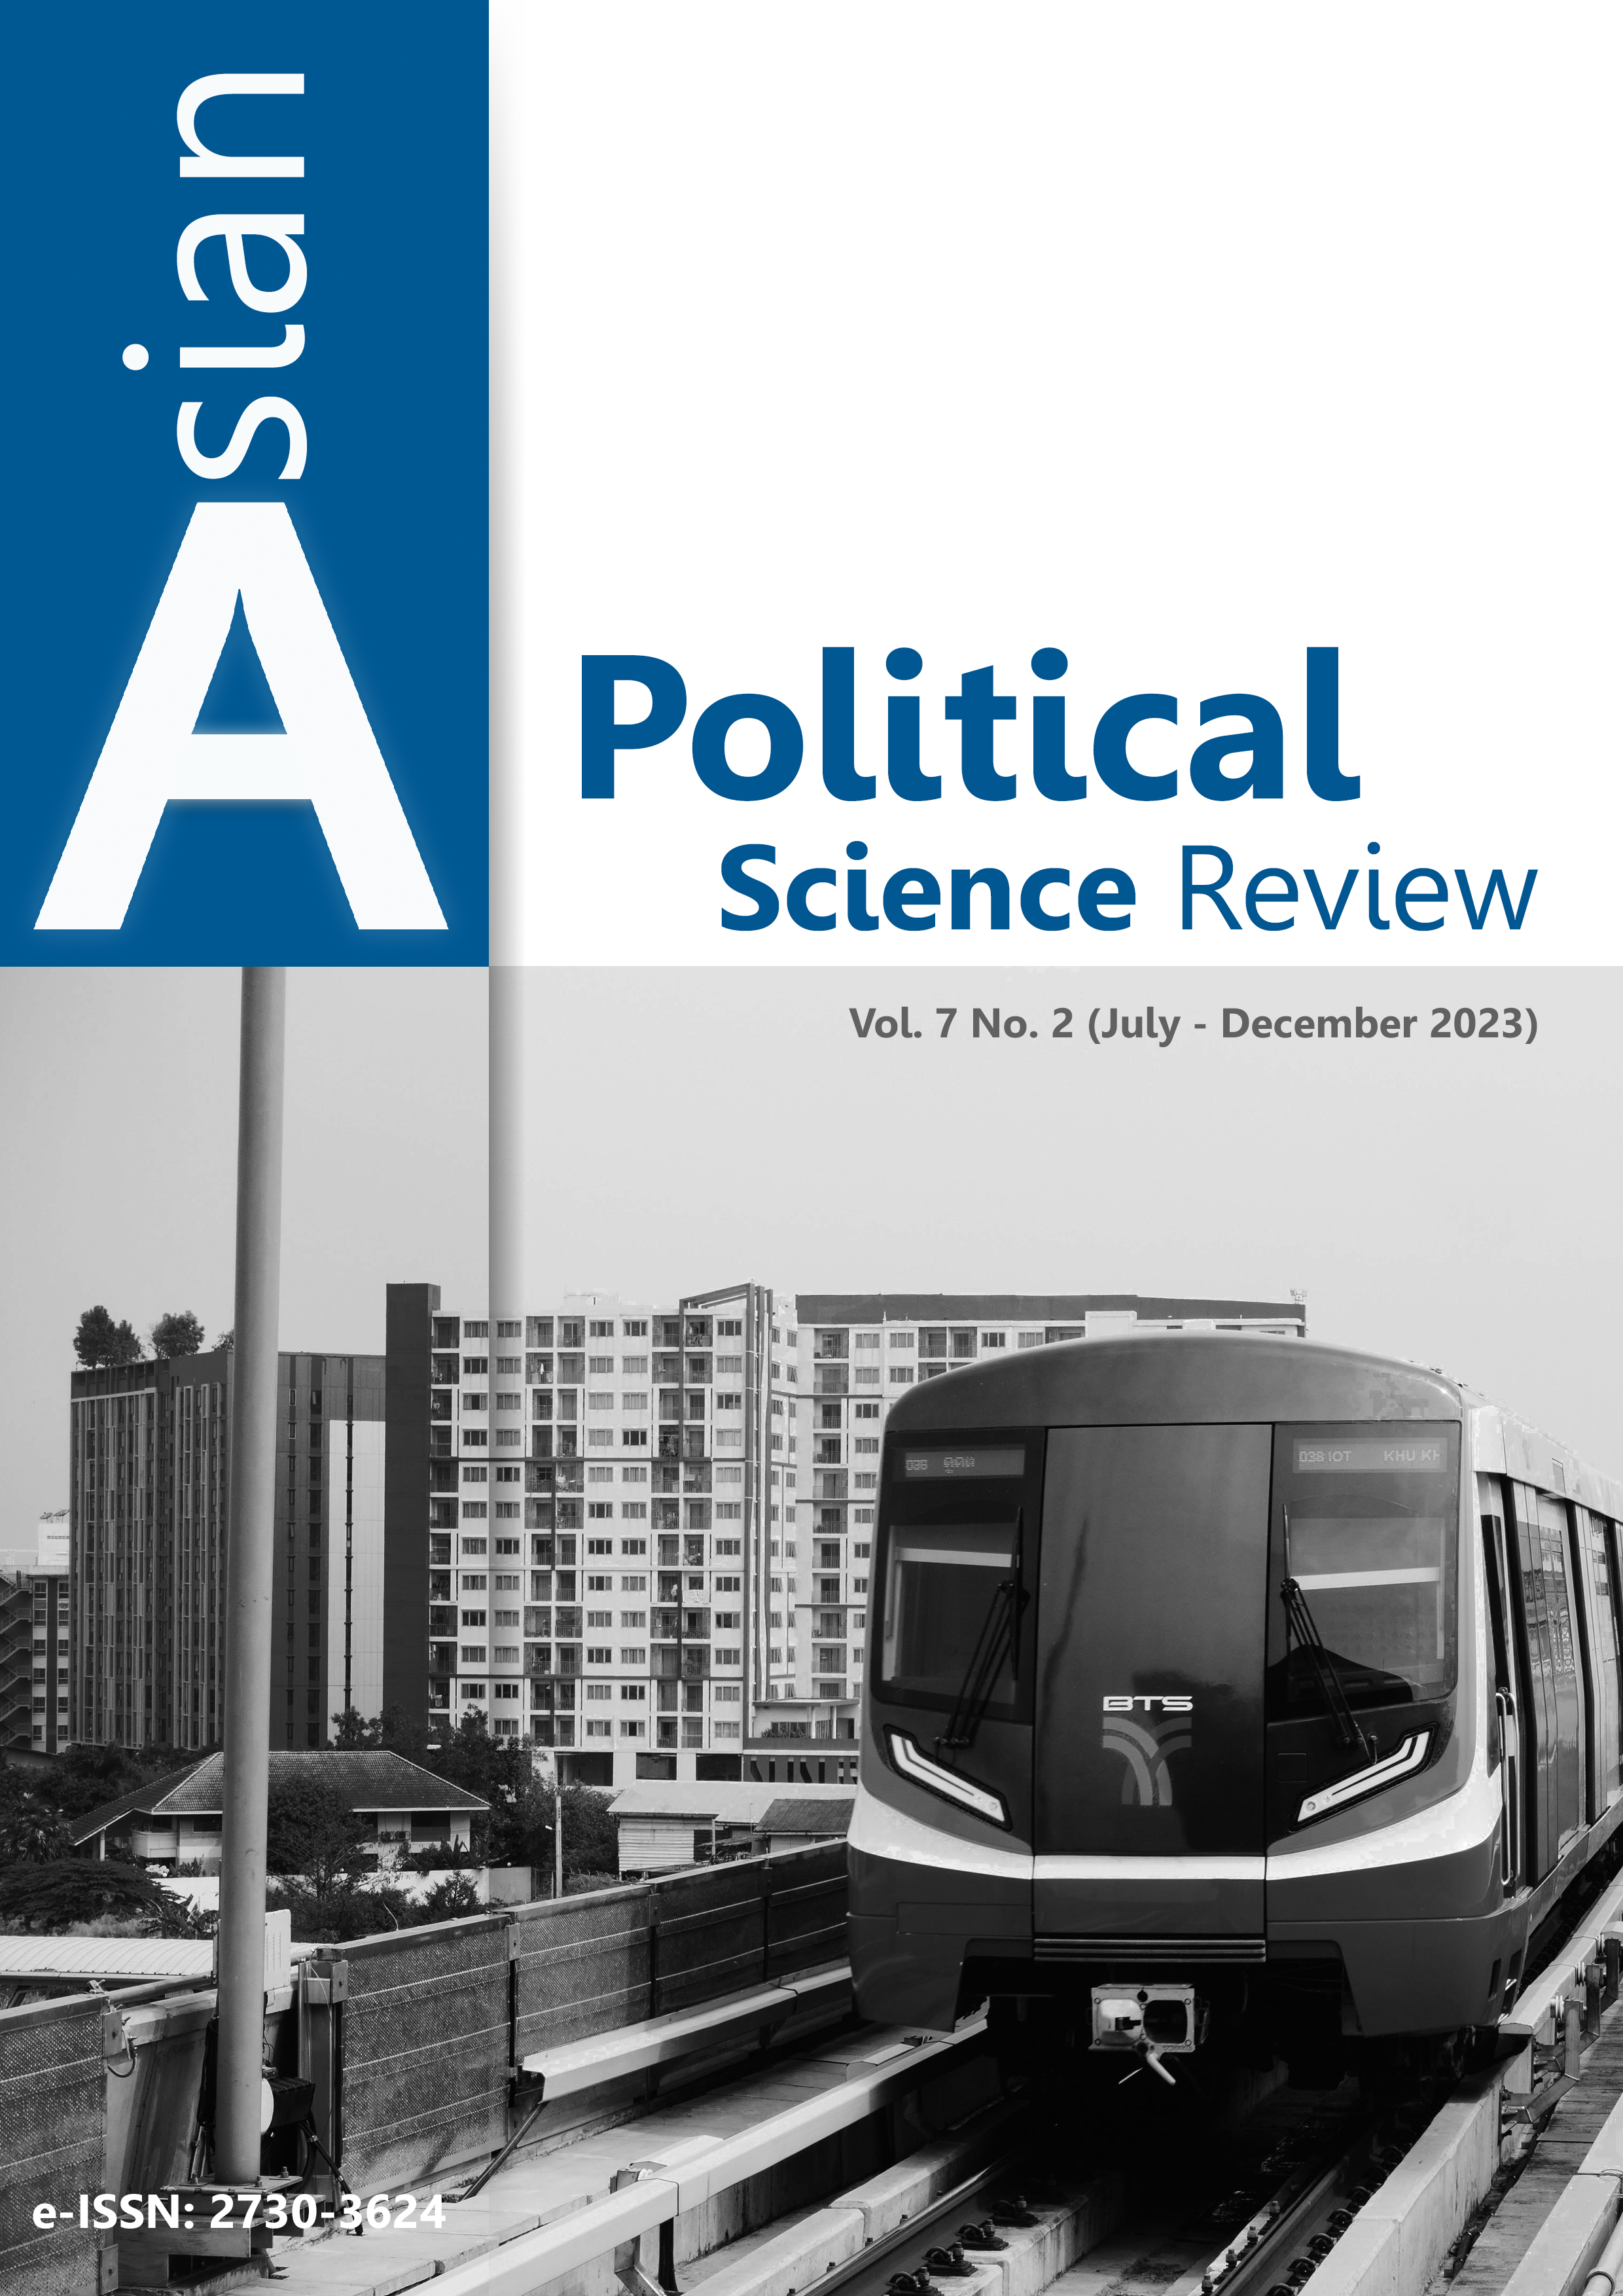 					View Vol. 7 No. 2 (2023): Asian Political Science Review
				